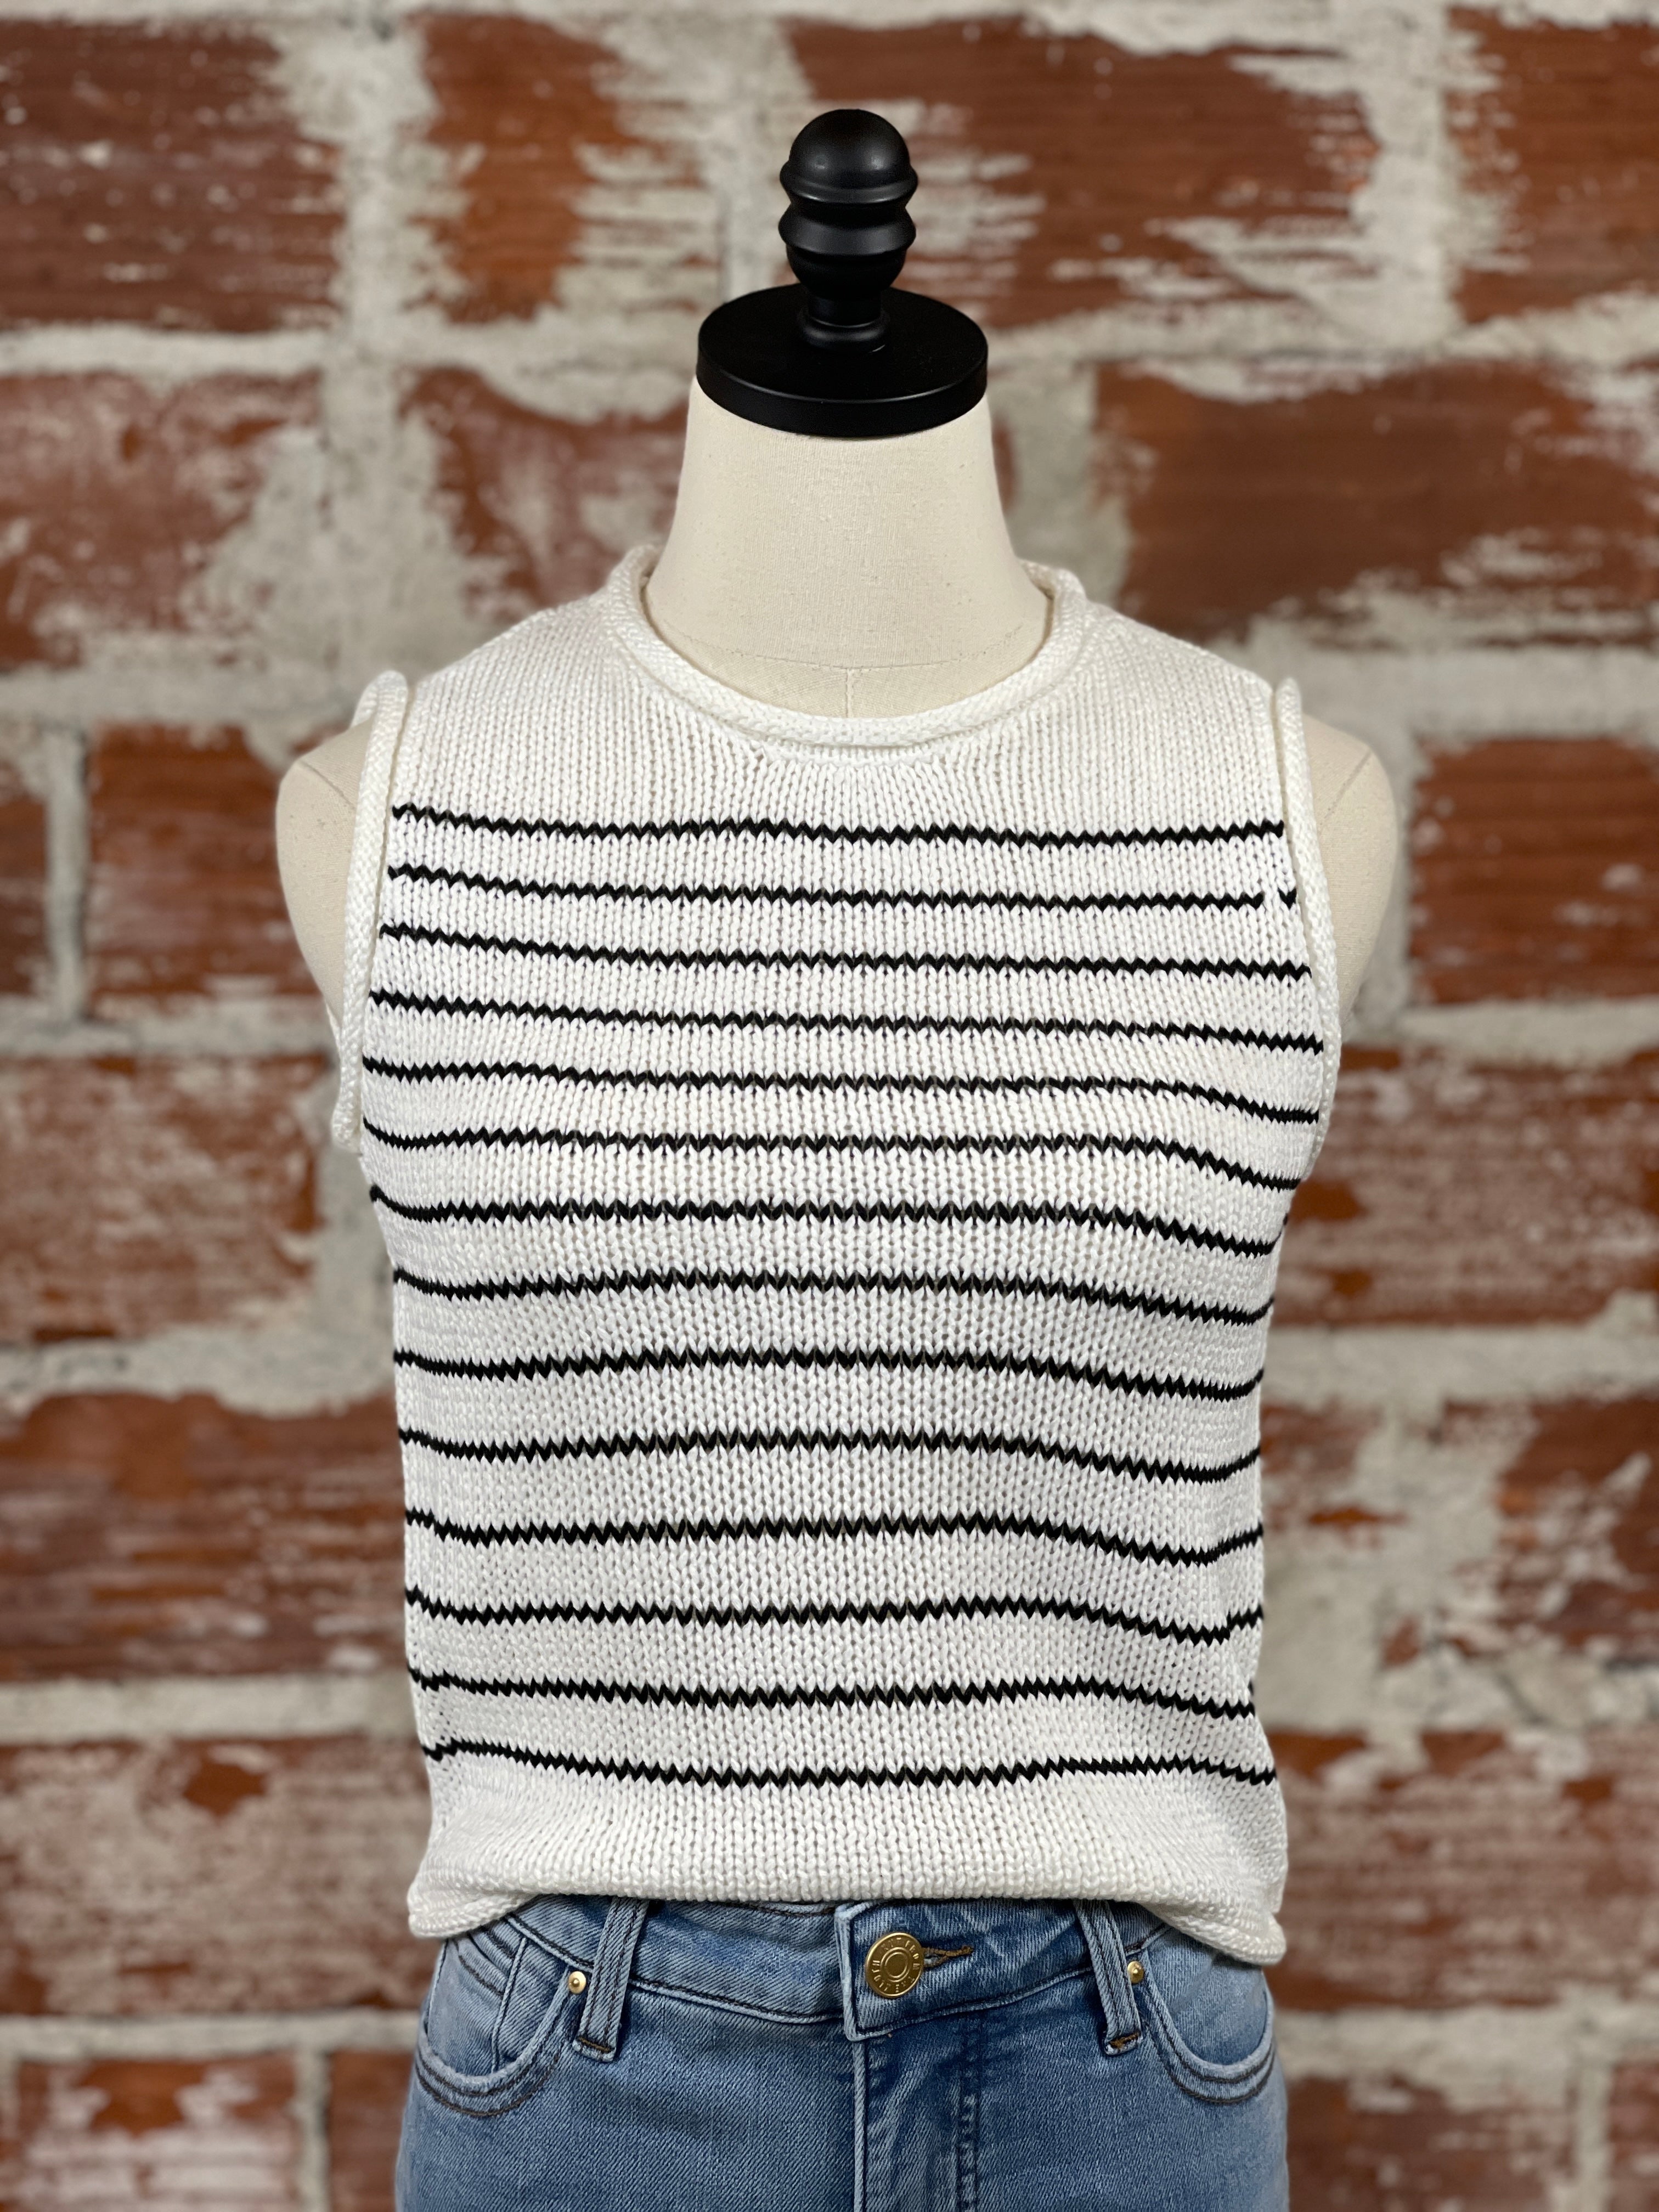 Kerensa Sweater Tank in Black and White-132 - Sweaters S/S (Jan - June)-Little Bird Boutique